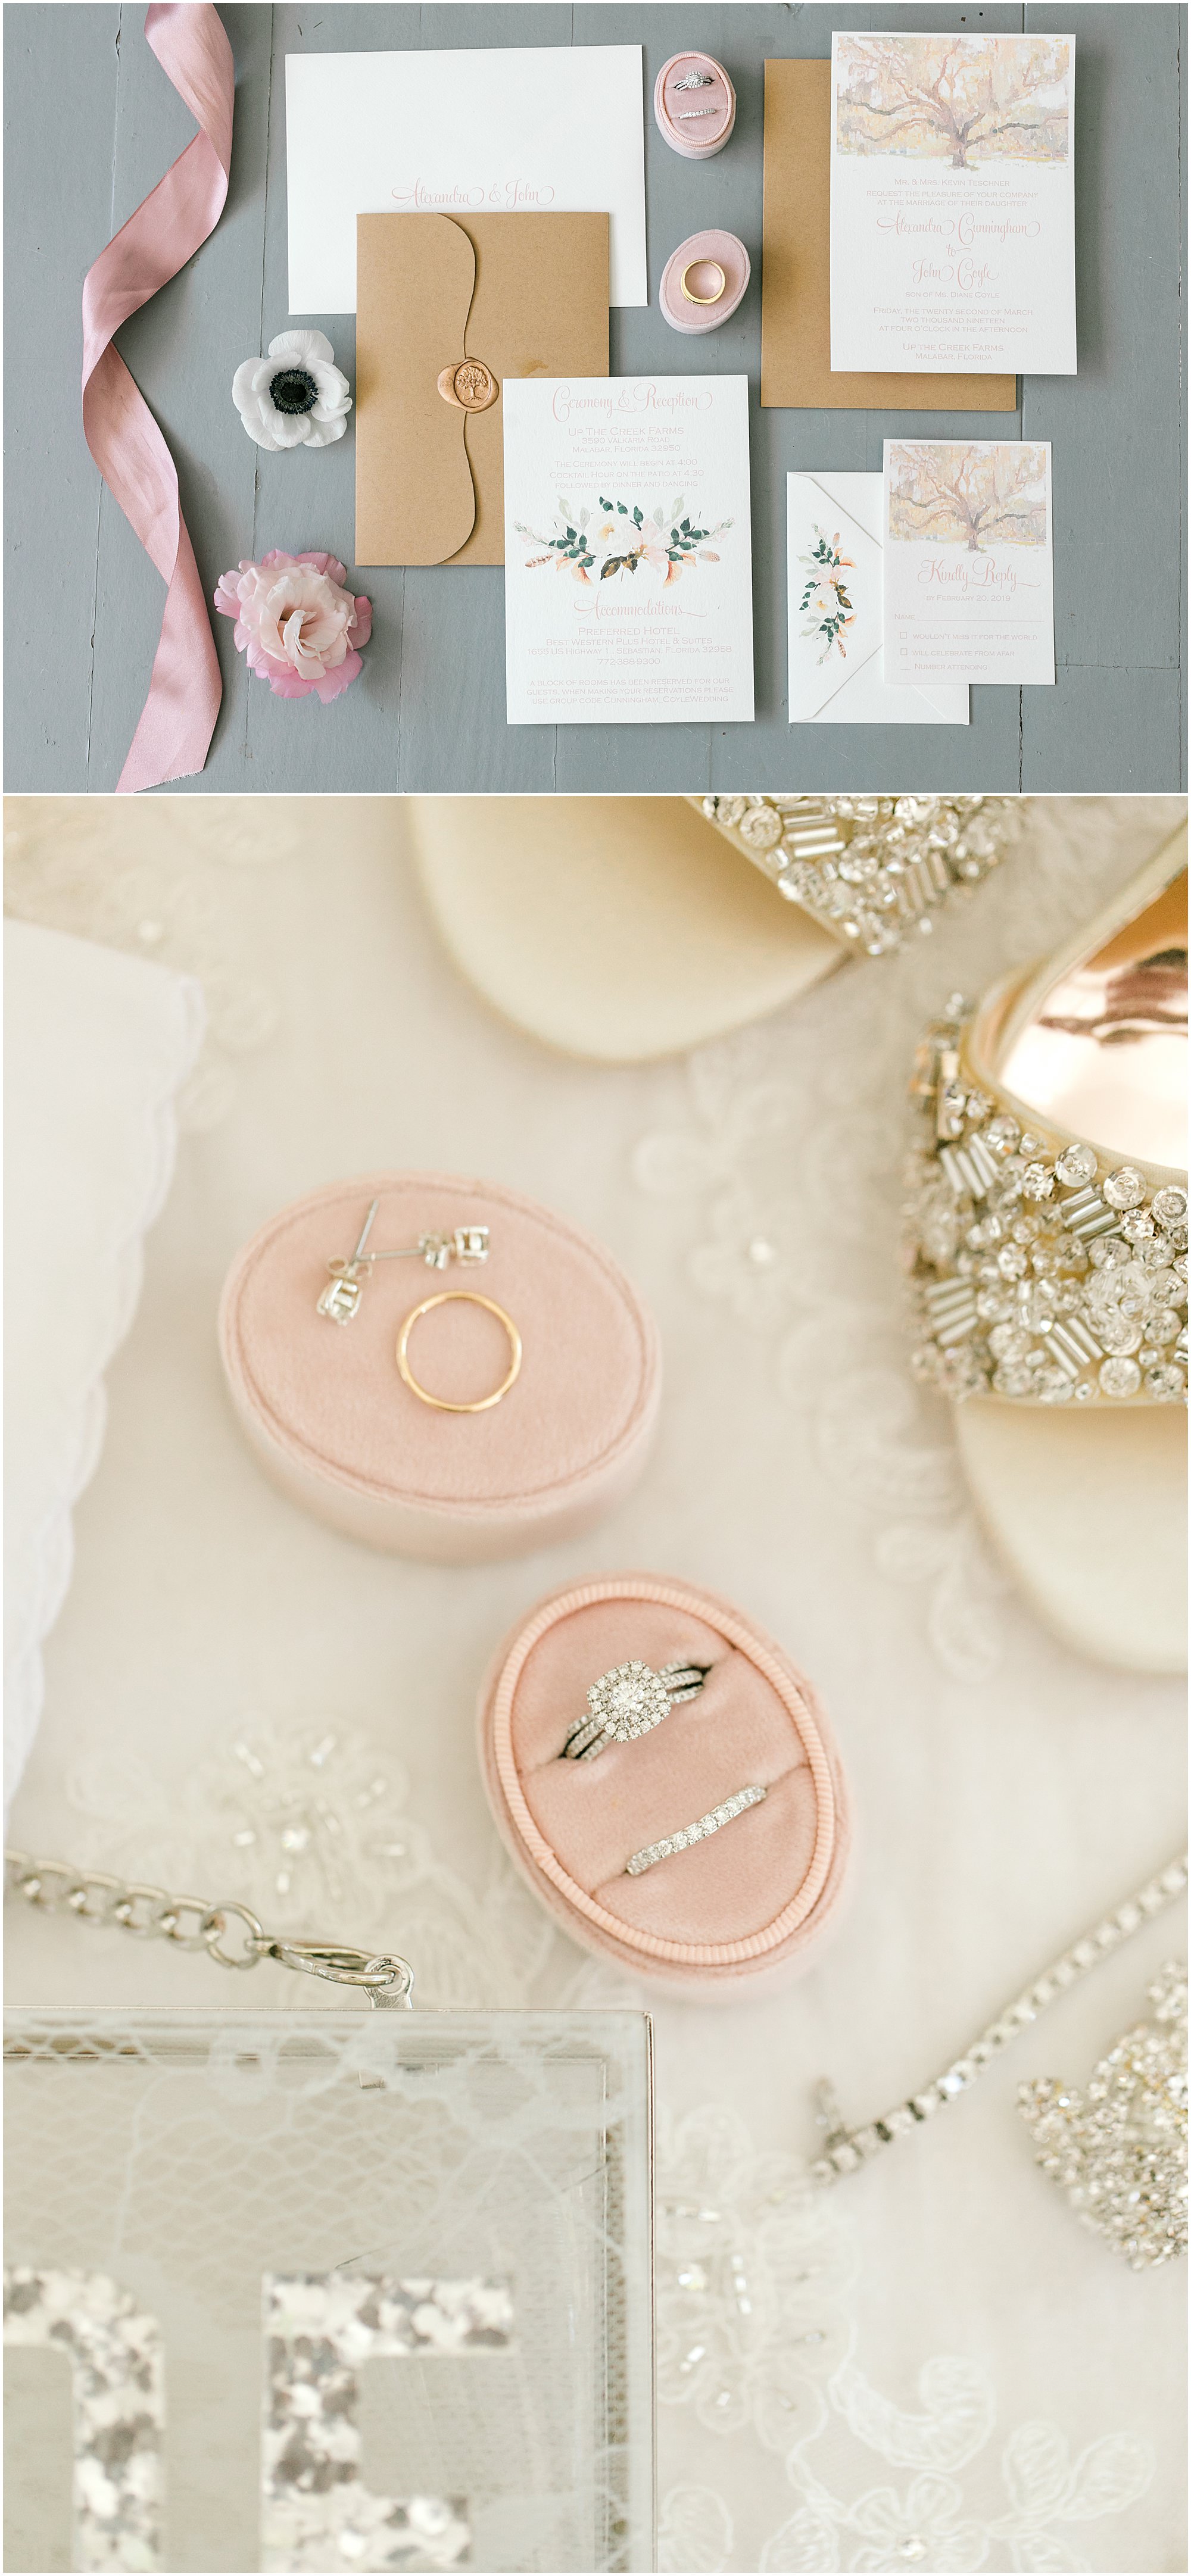 Magical Up the Creek Farms wedding stationary set and wedding rings